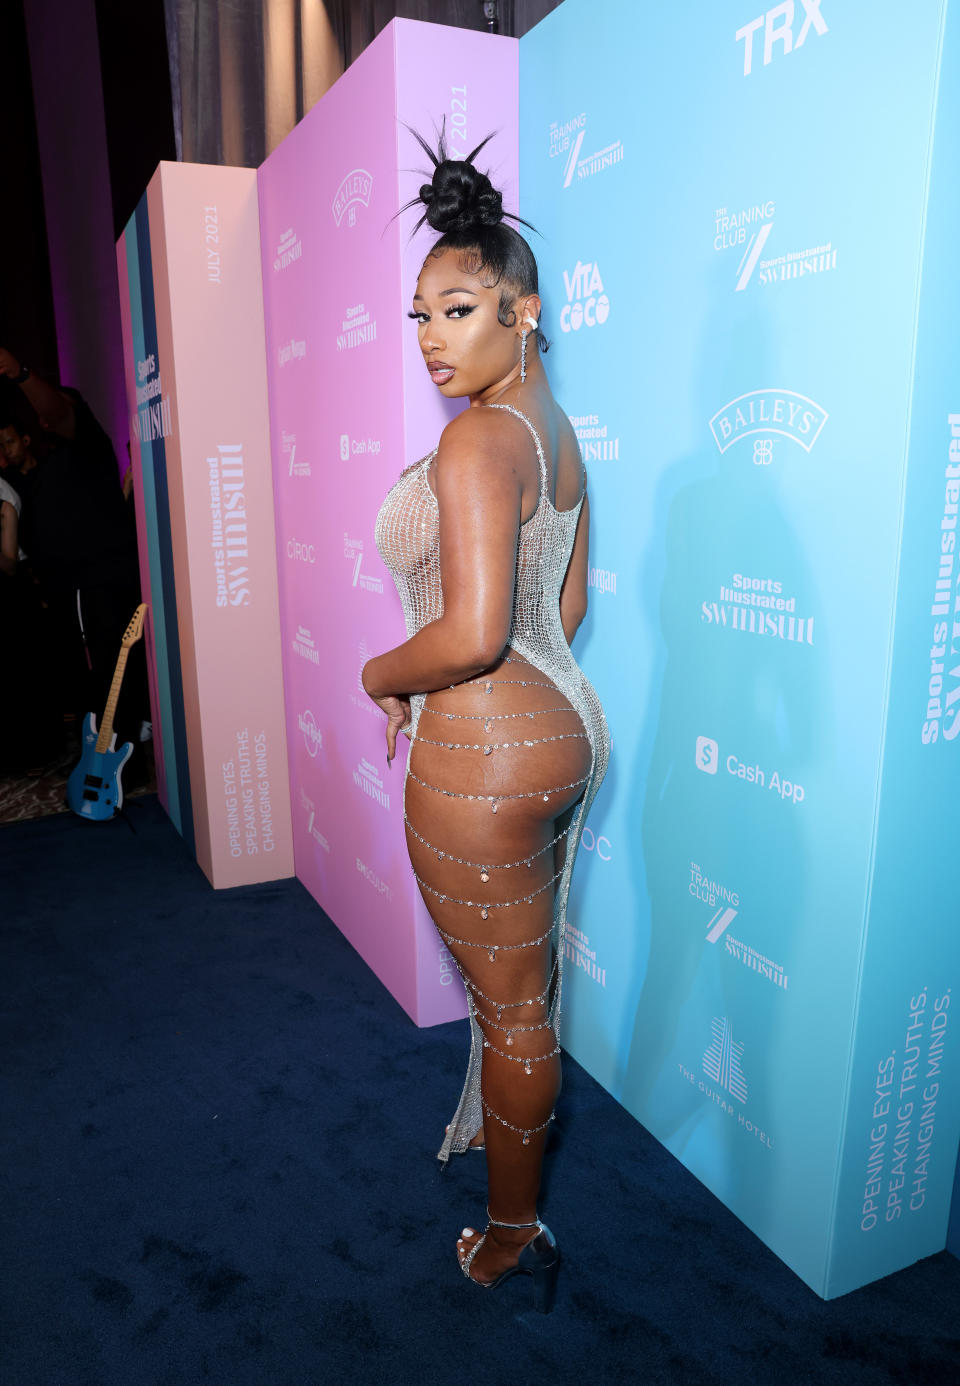 Megan Thee Stallion attended the launch party of the Sports Illustrated swimsuit issue, of which she is the cover star, in a naked dress, which fans loved. Photo: Getty